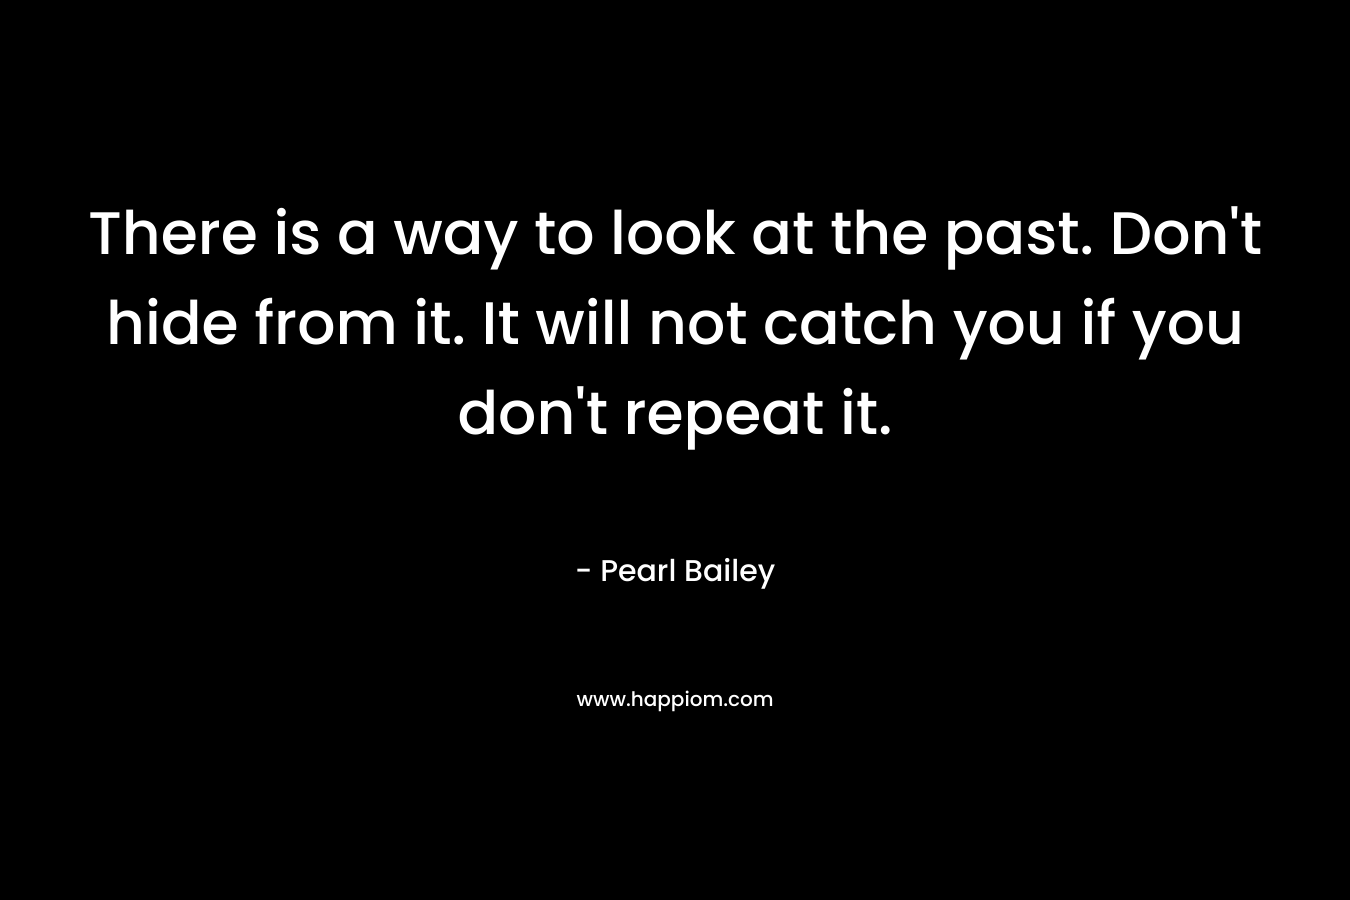 There is a way to look at the past. Don't hide from it. It will not catch you if you don't repeat it.